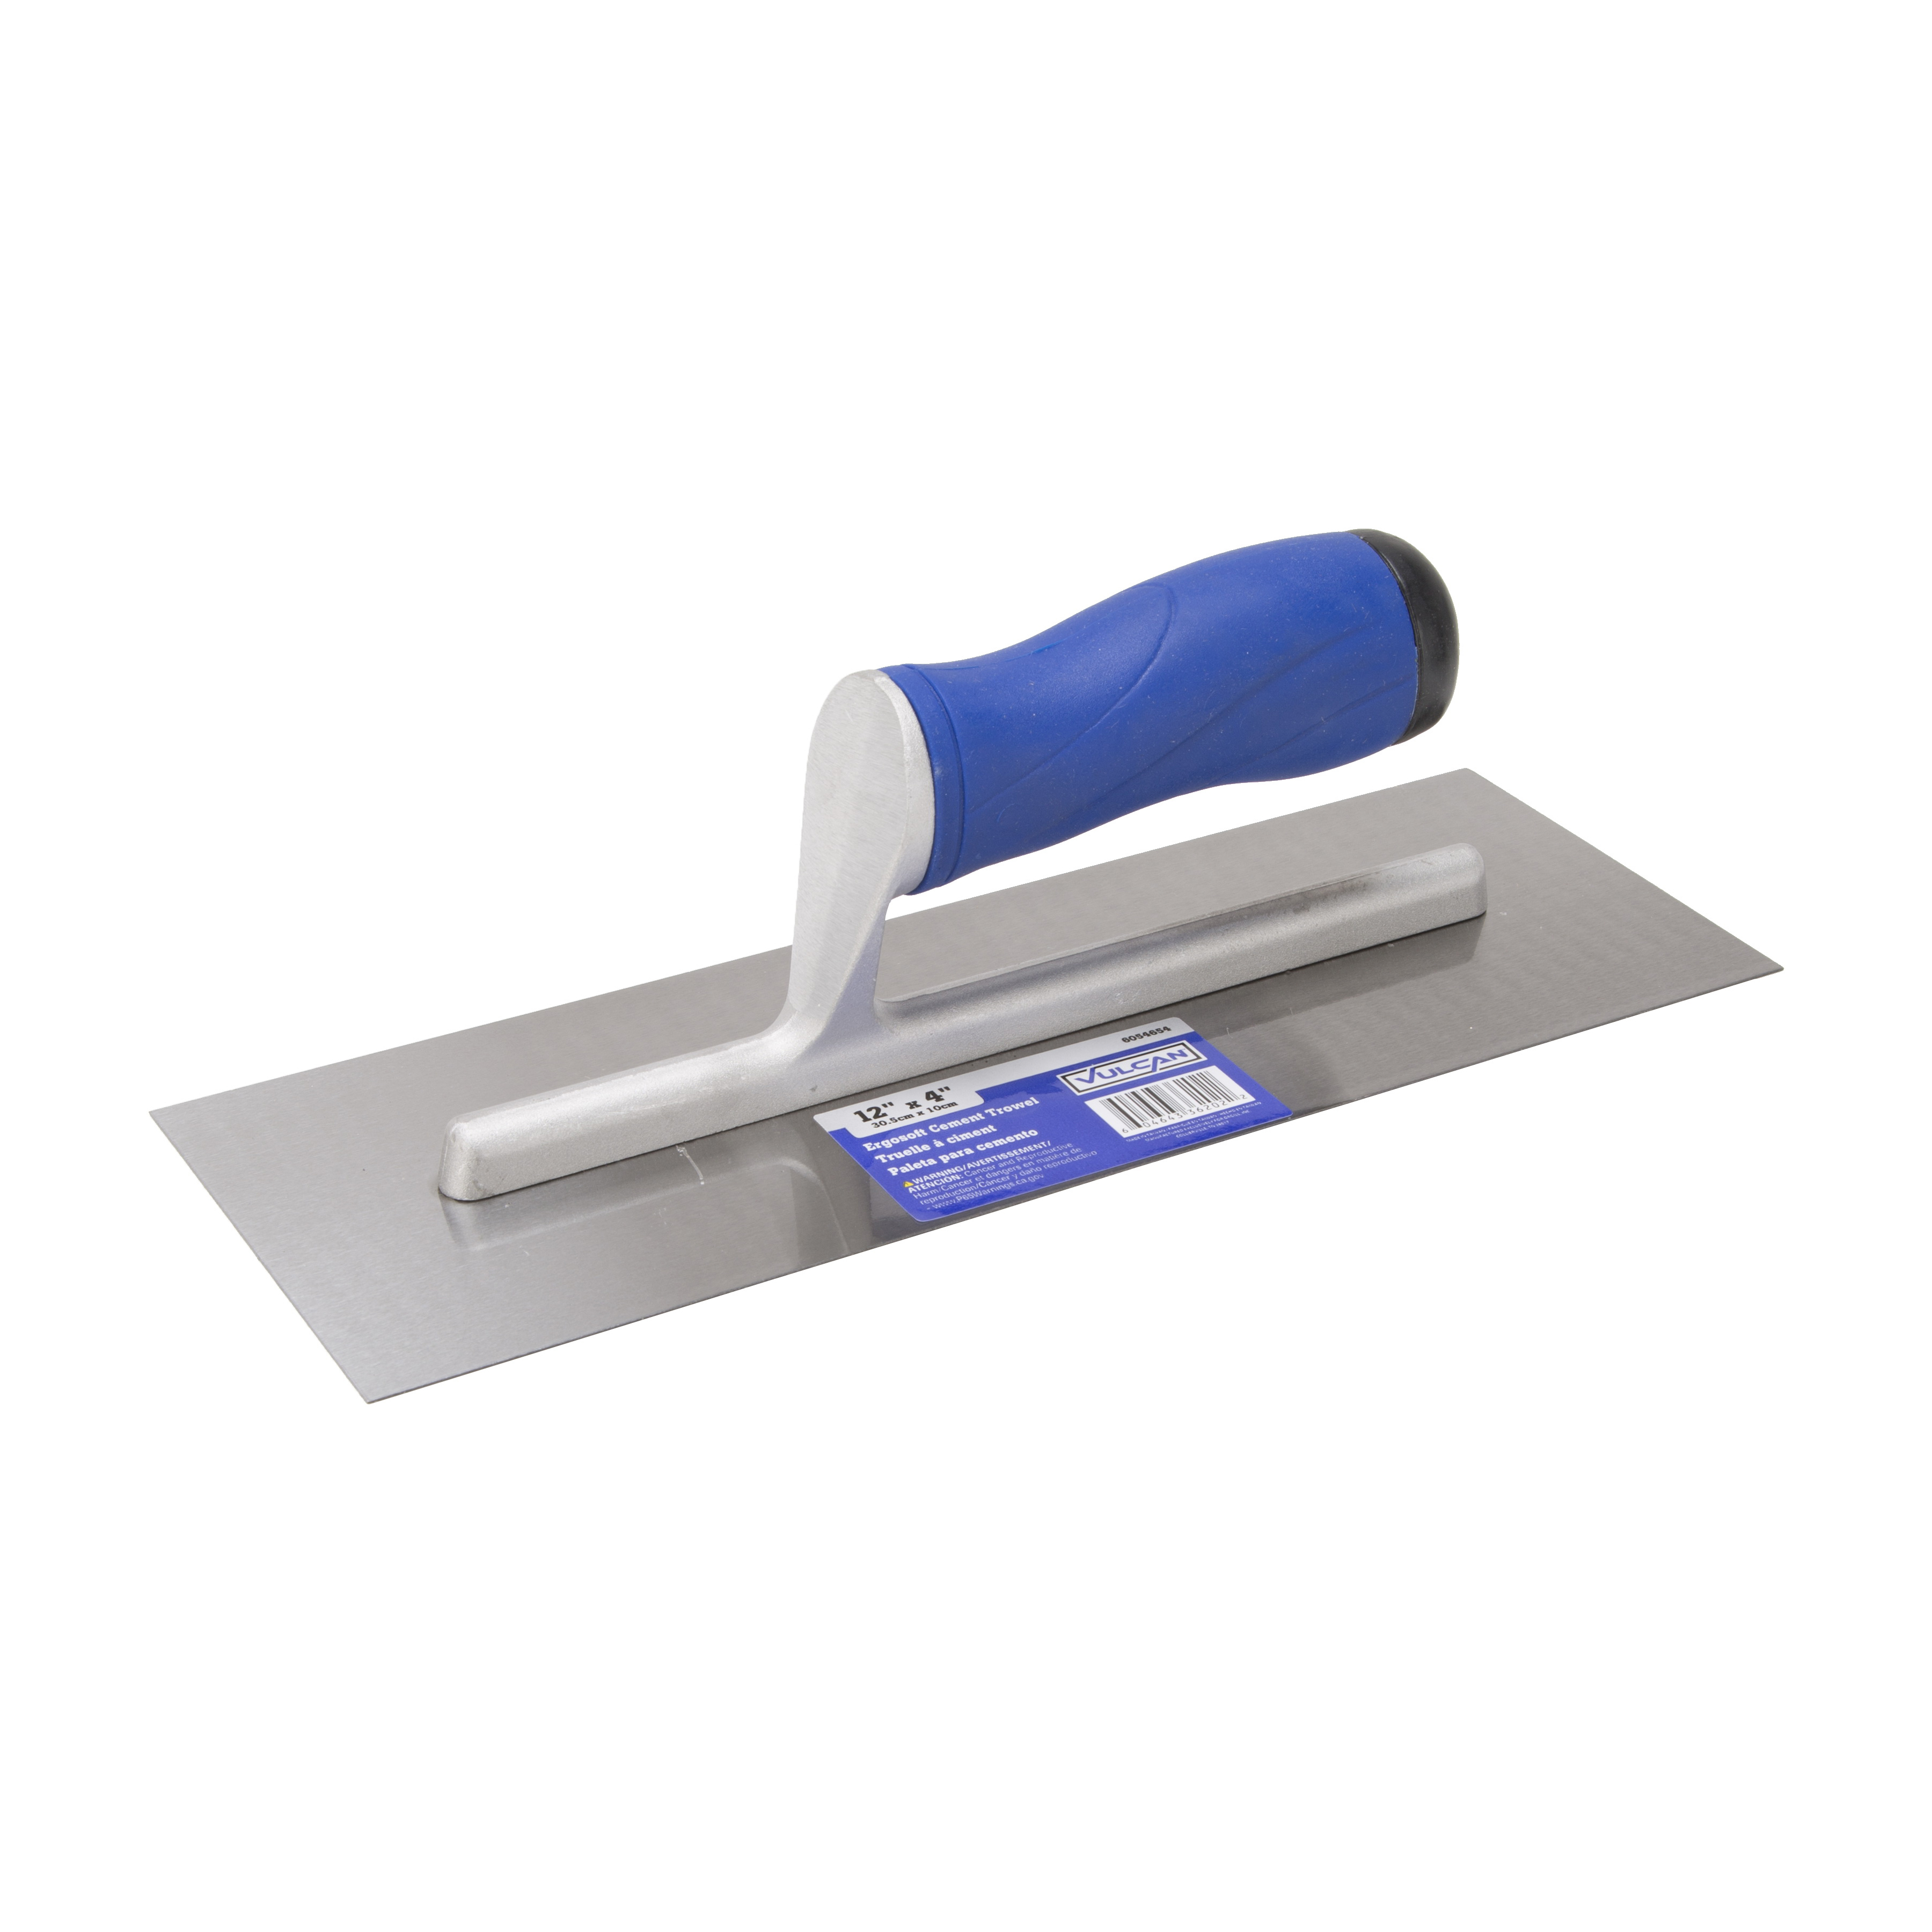 36202 Cement Trowel, 12 in L Blade, 4 in W Blade, Right Angle End, Ergonomic Handle, Plastic Handle